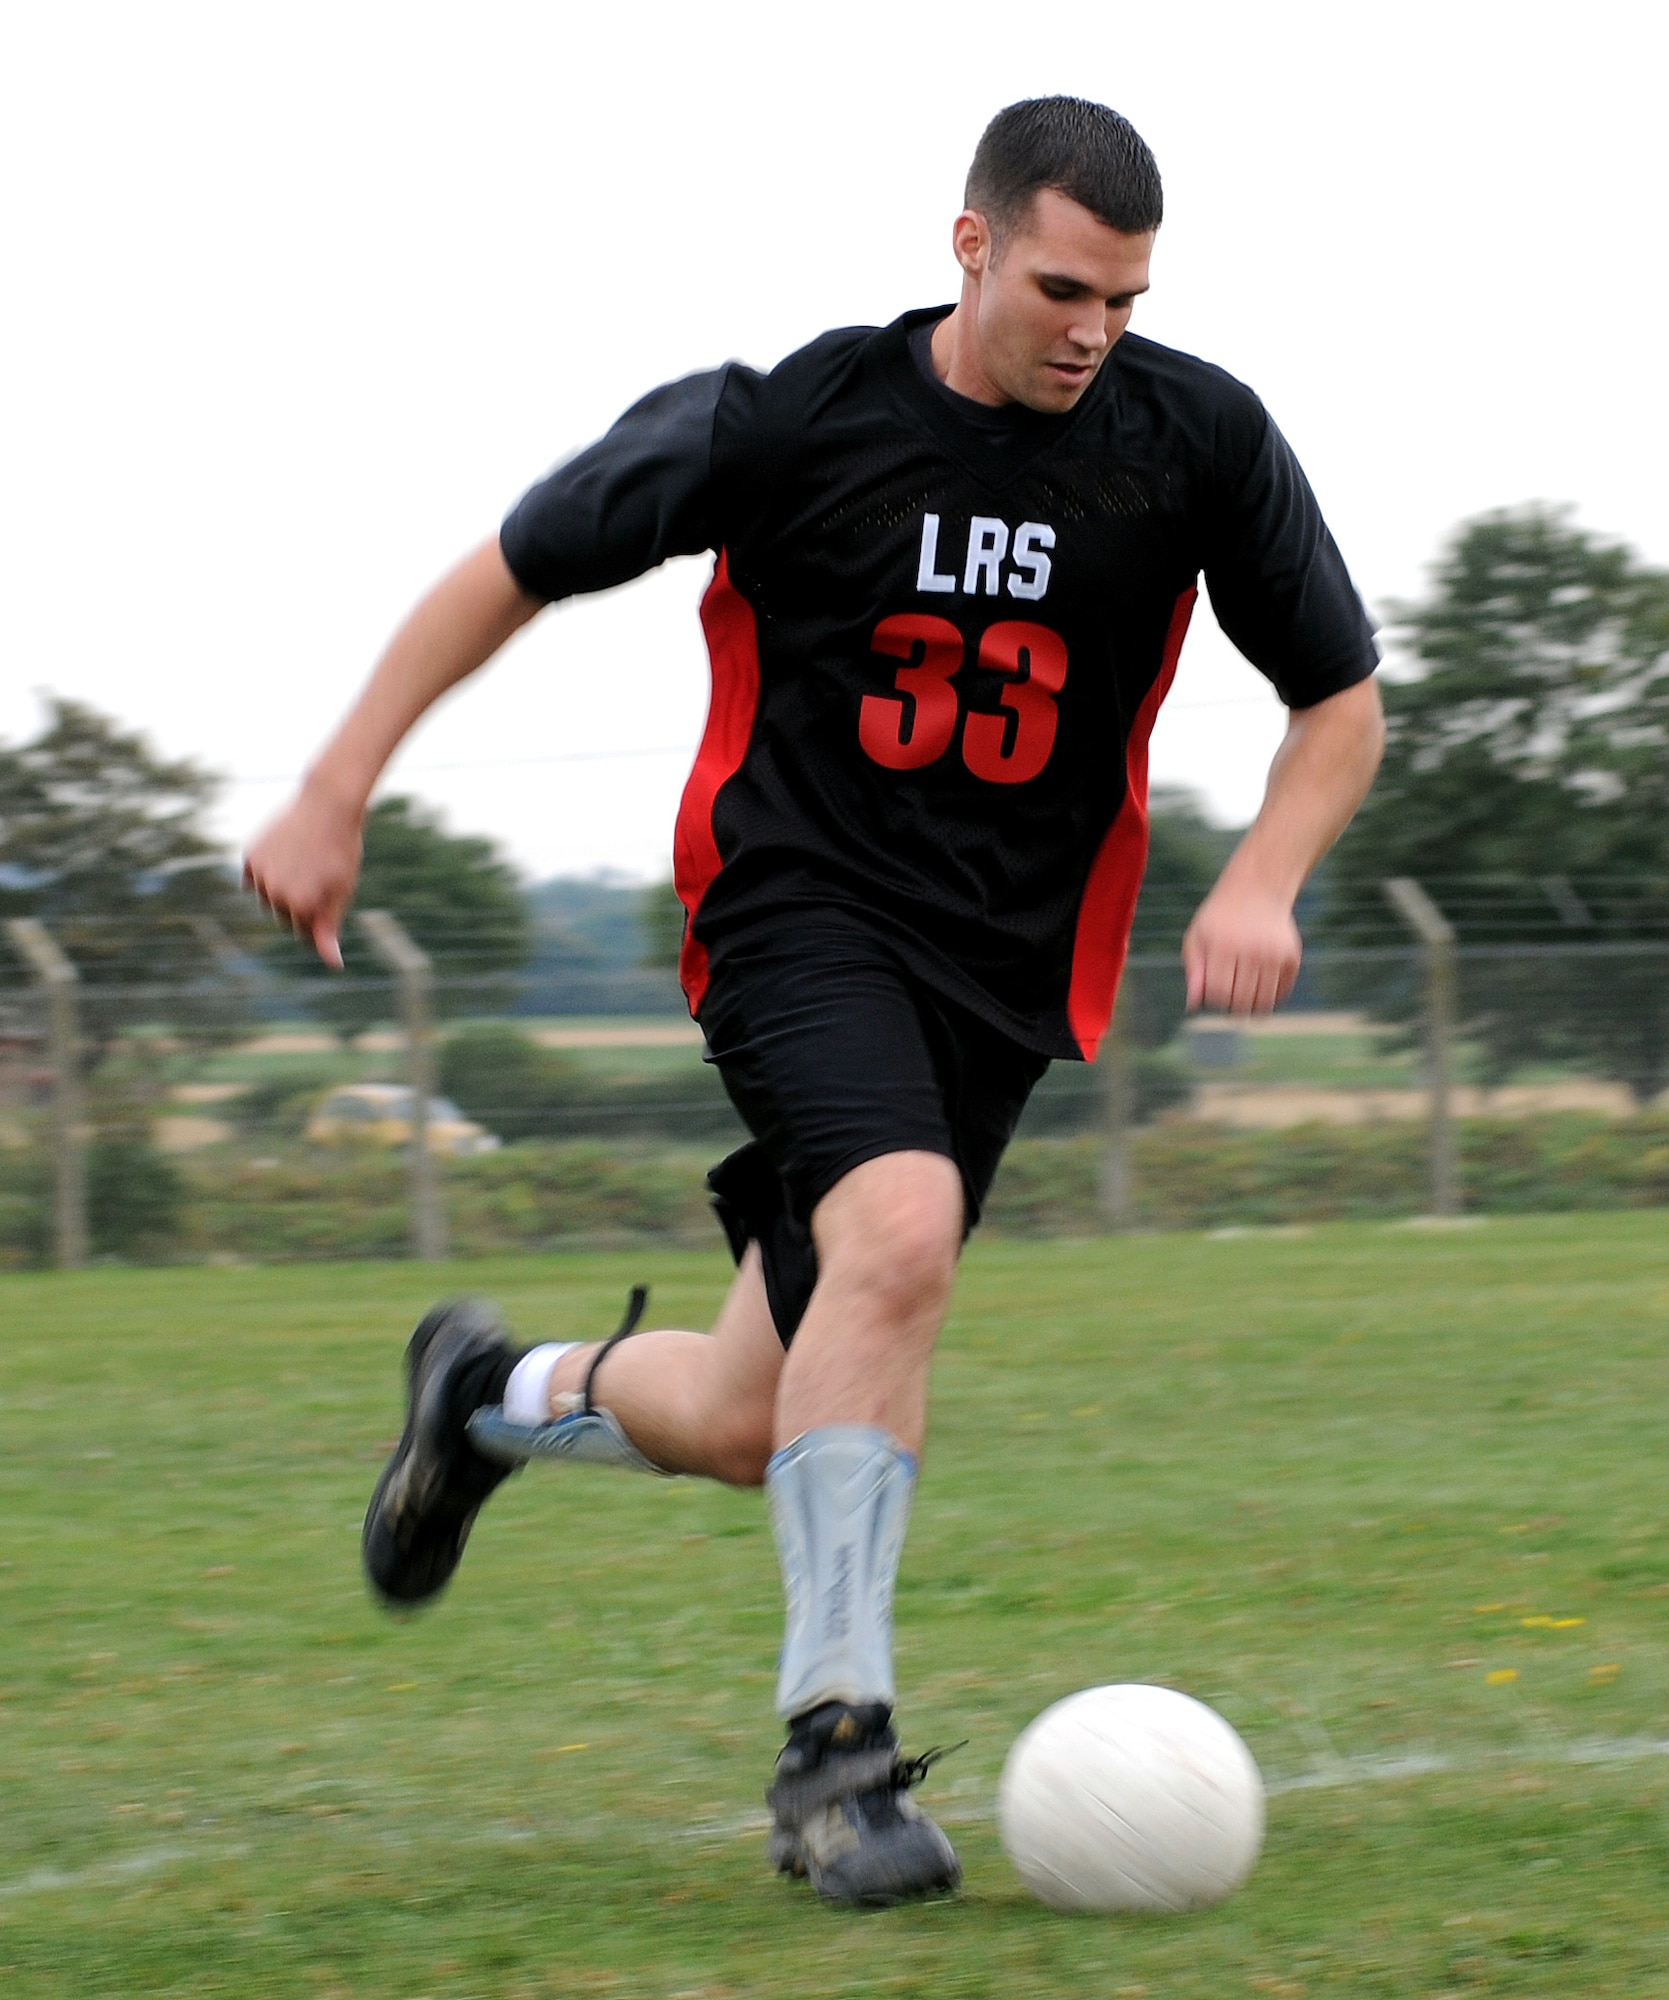 RAF MILDENHALL, England -- Forward Ray Wisdom, 100th Logistics Readiness Squadron, dribbles downfield before scoring the first goal of the 4-0 game against the 727th Air Mobility Squadron Aug. 24 at the southside soccer fields. This was the first day of play for the Mildenhall Intramural Outdoor Soccer league and a shortage of players forced the 727th AMS to forfit at halftime. Anyone interested in the league should contact the Northside Fitness Center at DSN 238-2349. (U.S. Air Force photo by Senior Airman Thomas Trower)